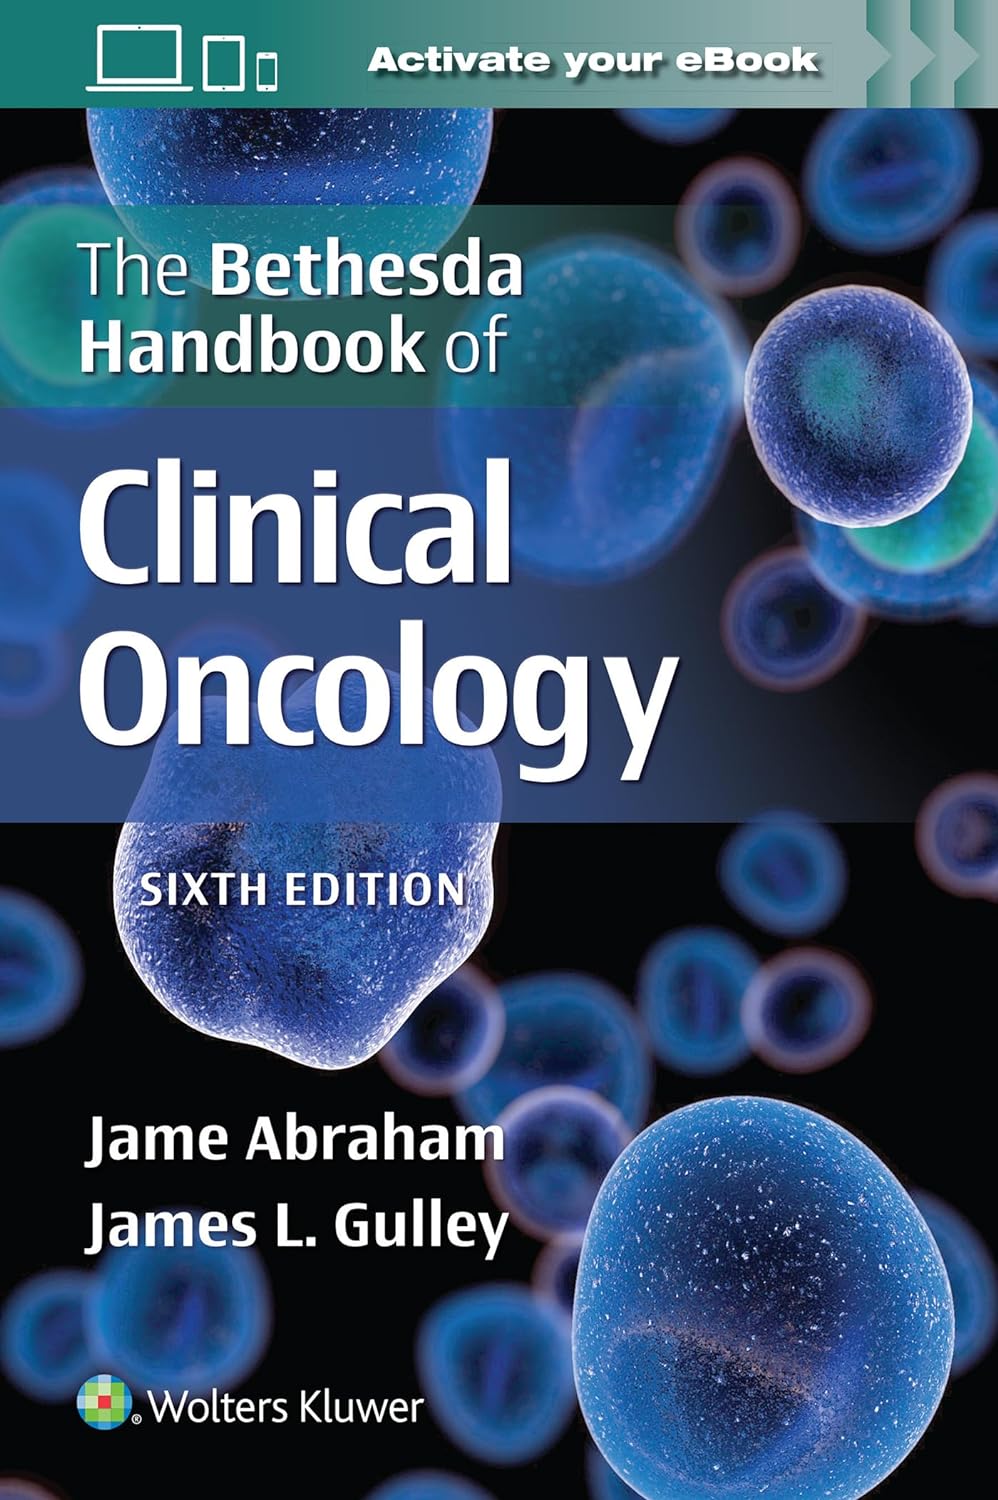 The Bethesda Handbook of Clinical Oncology (6th Edition)